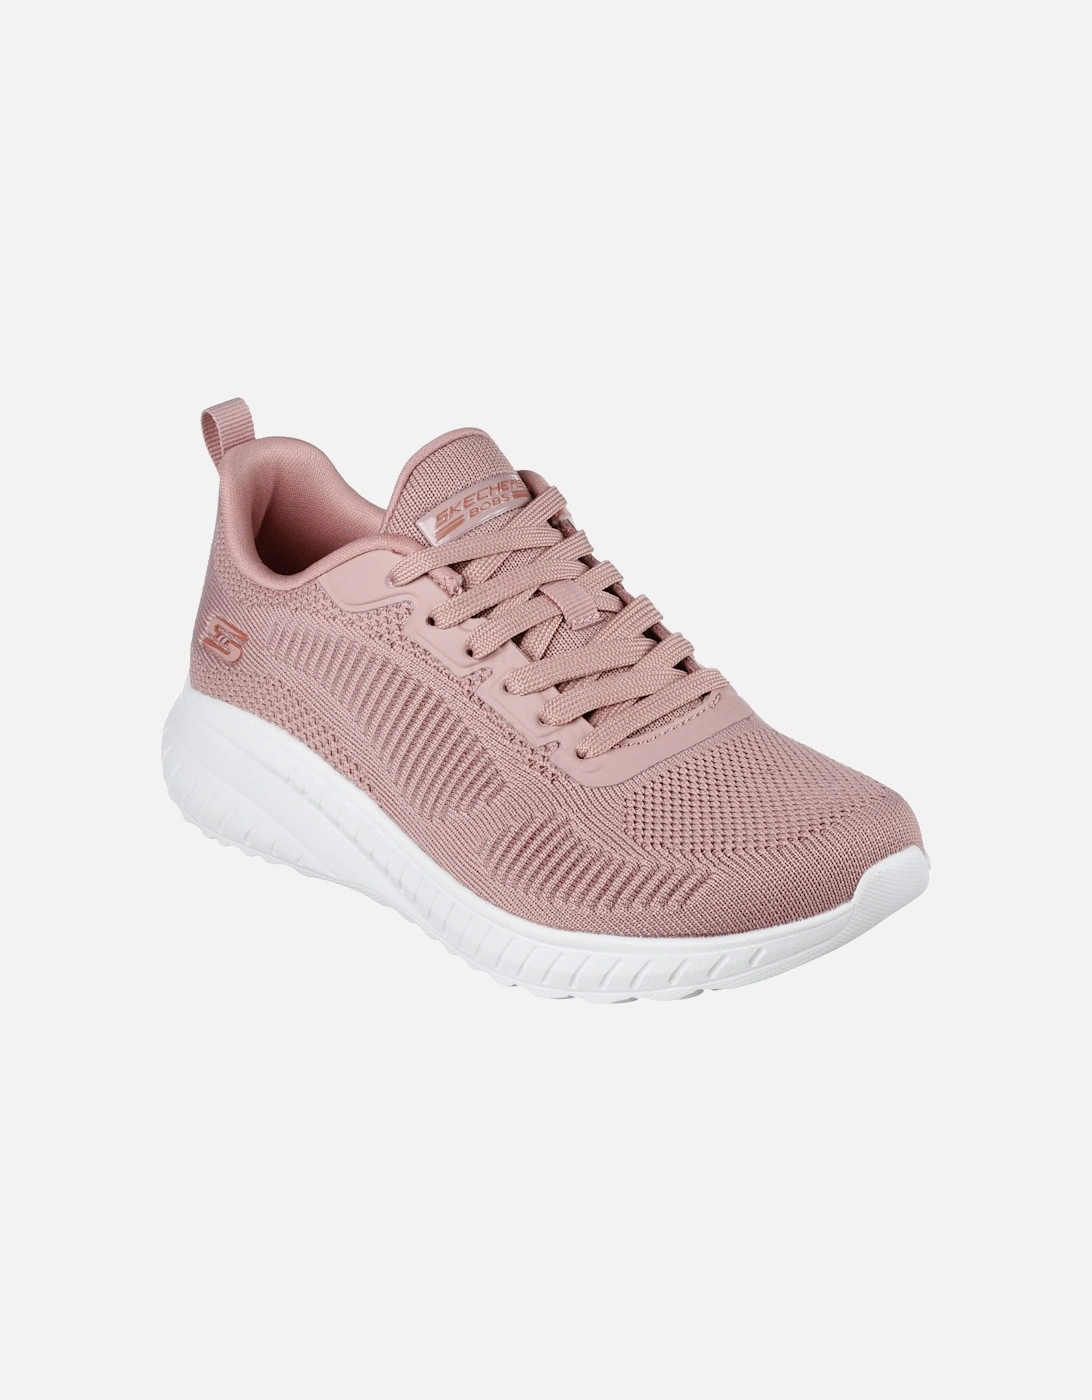 Womens Bobs Squad Chaos Face Off Trainers (Blush)